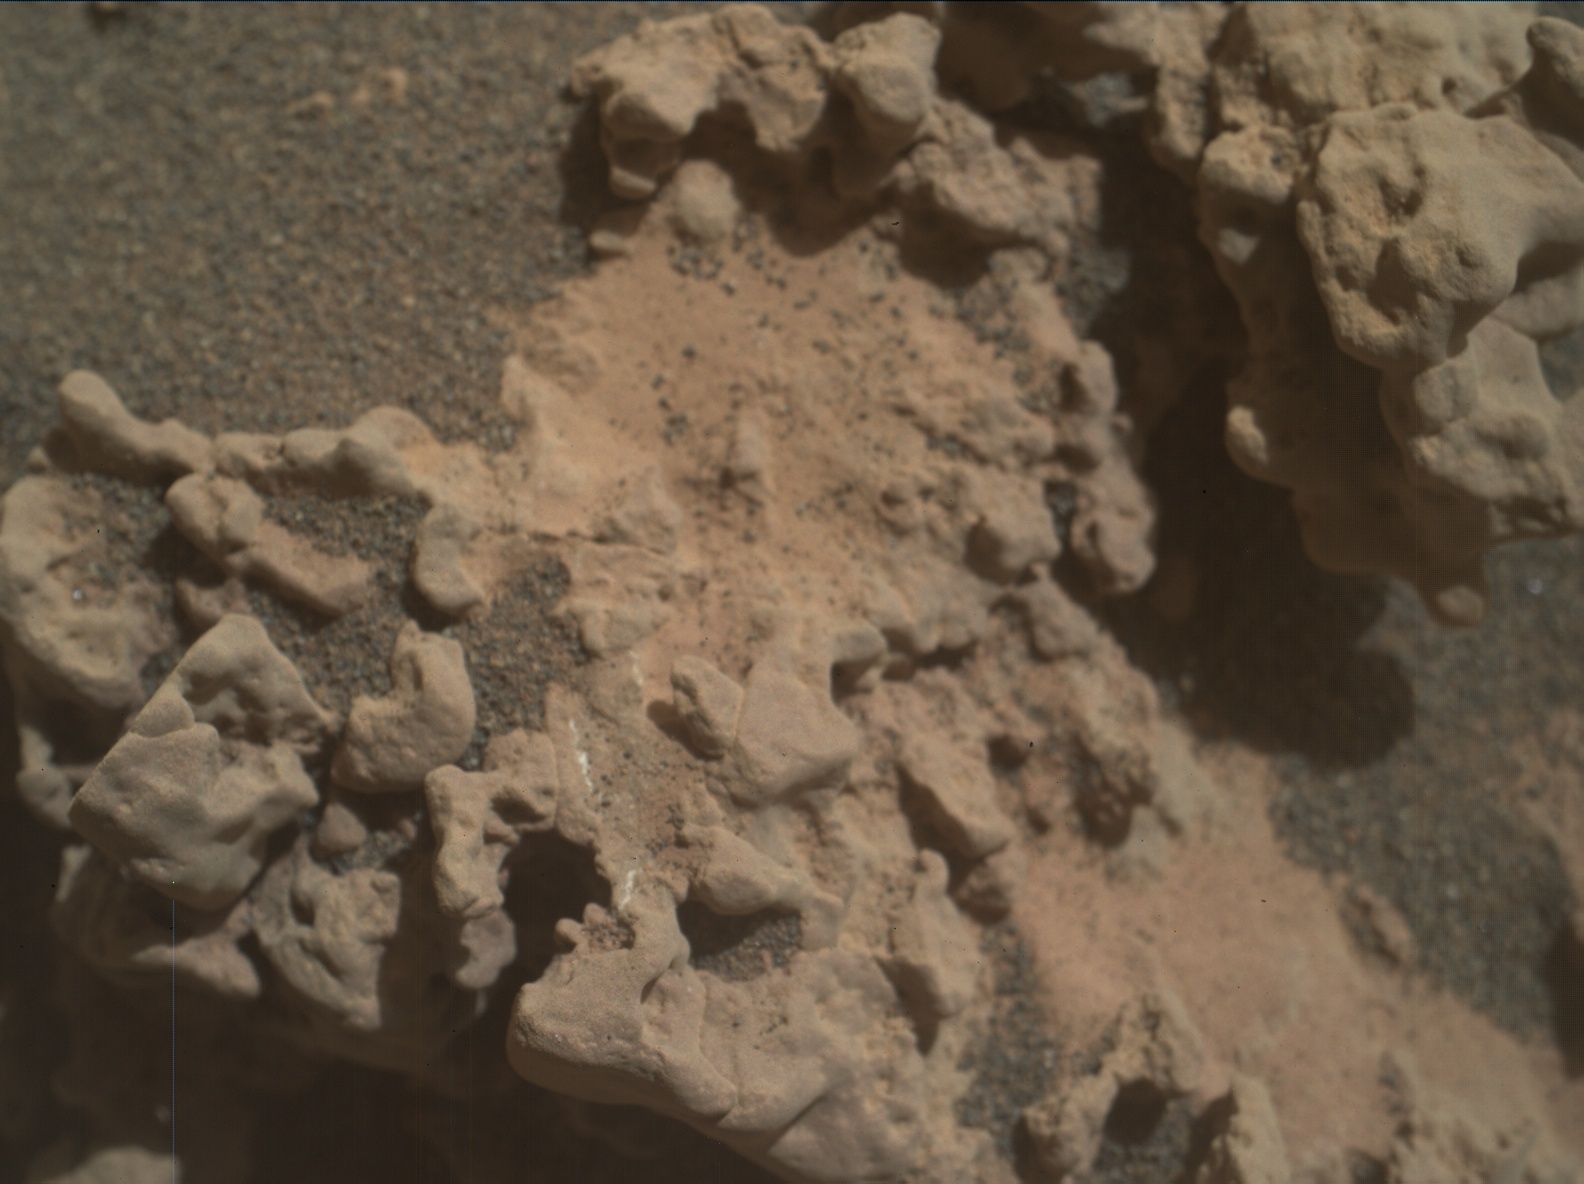 Nasa's Mars rover Curiosity acquired this image using its Mars Hand Lens Imager (MAHLI) on Sol 3160